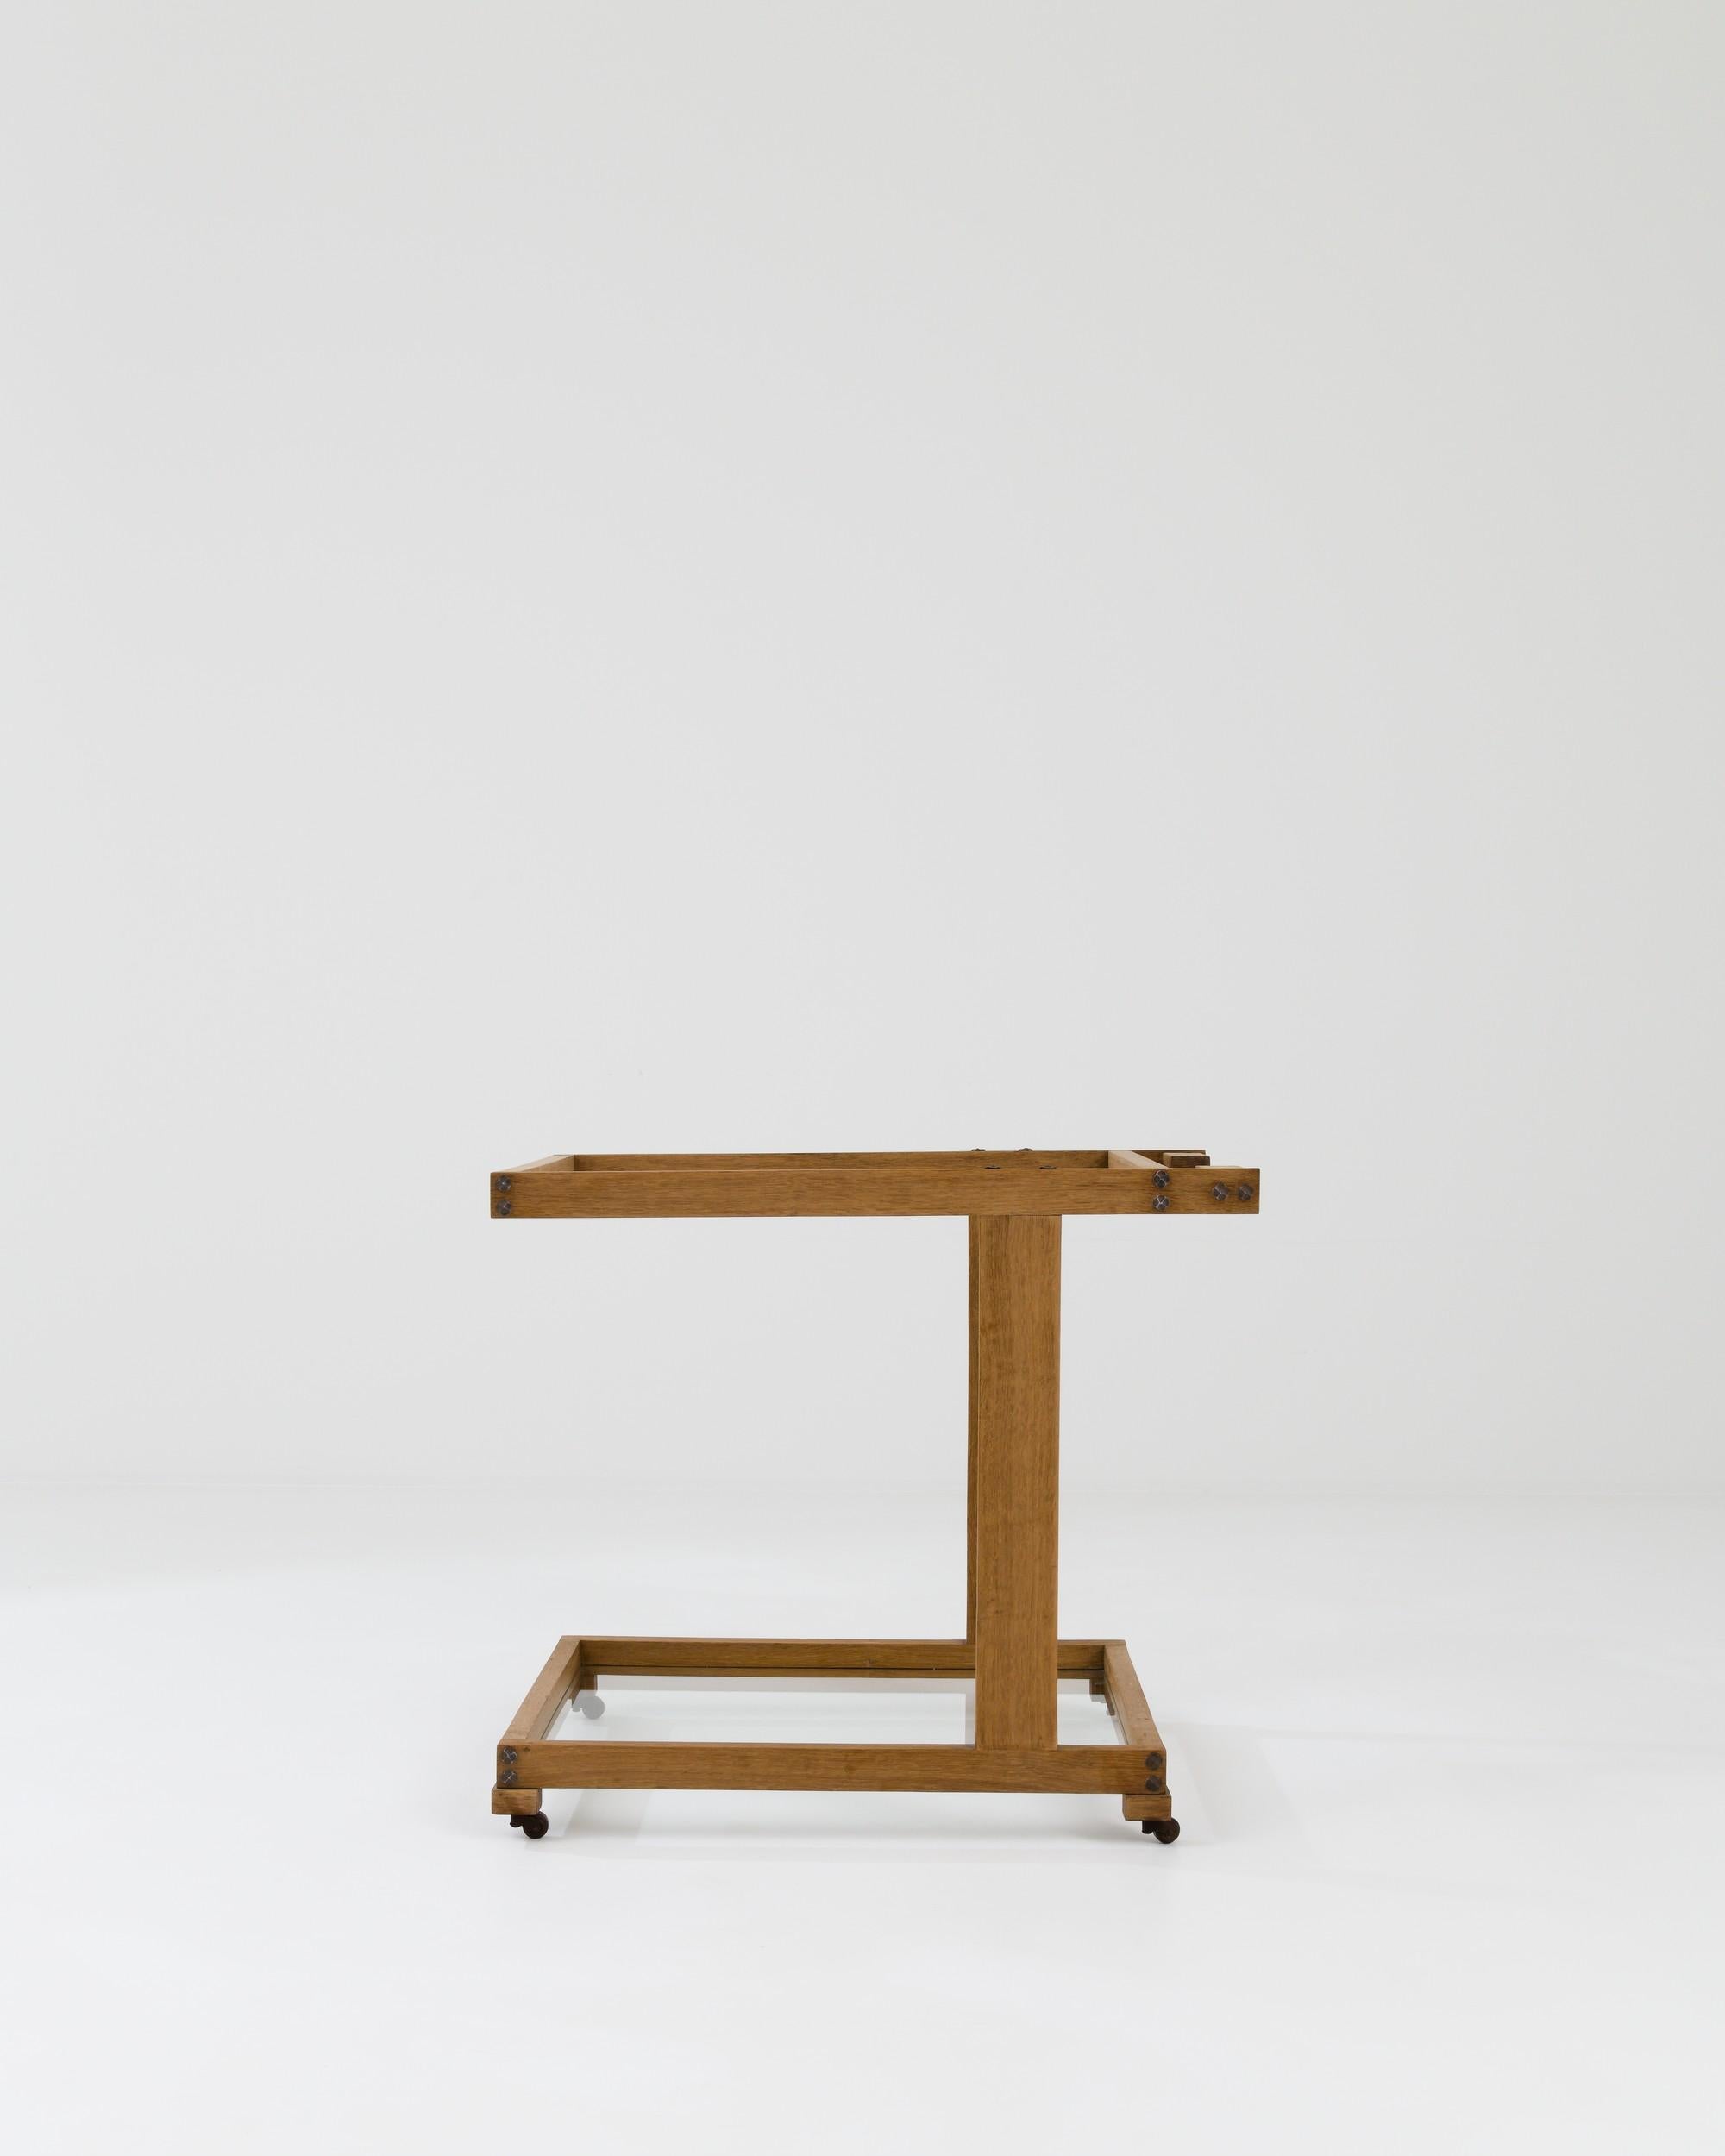 A wooden bar cart created in 20th century France. Minimal and stylish, yet also warm and rustic, this bar cart offers a truly unique look. Flawless mortise and tenon joinery and vintage hardware frame an upper and lower glass shelf, creating a